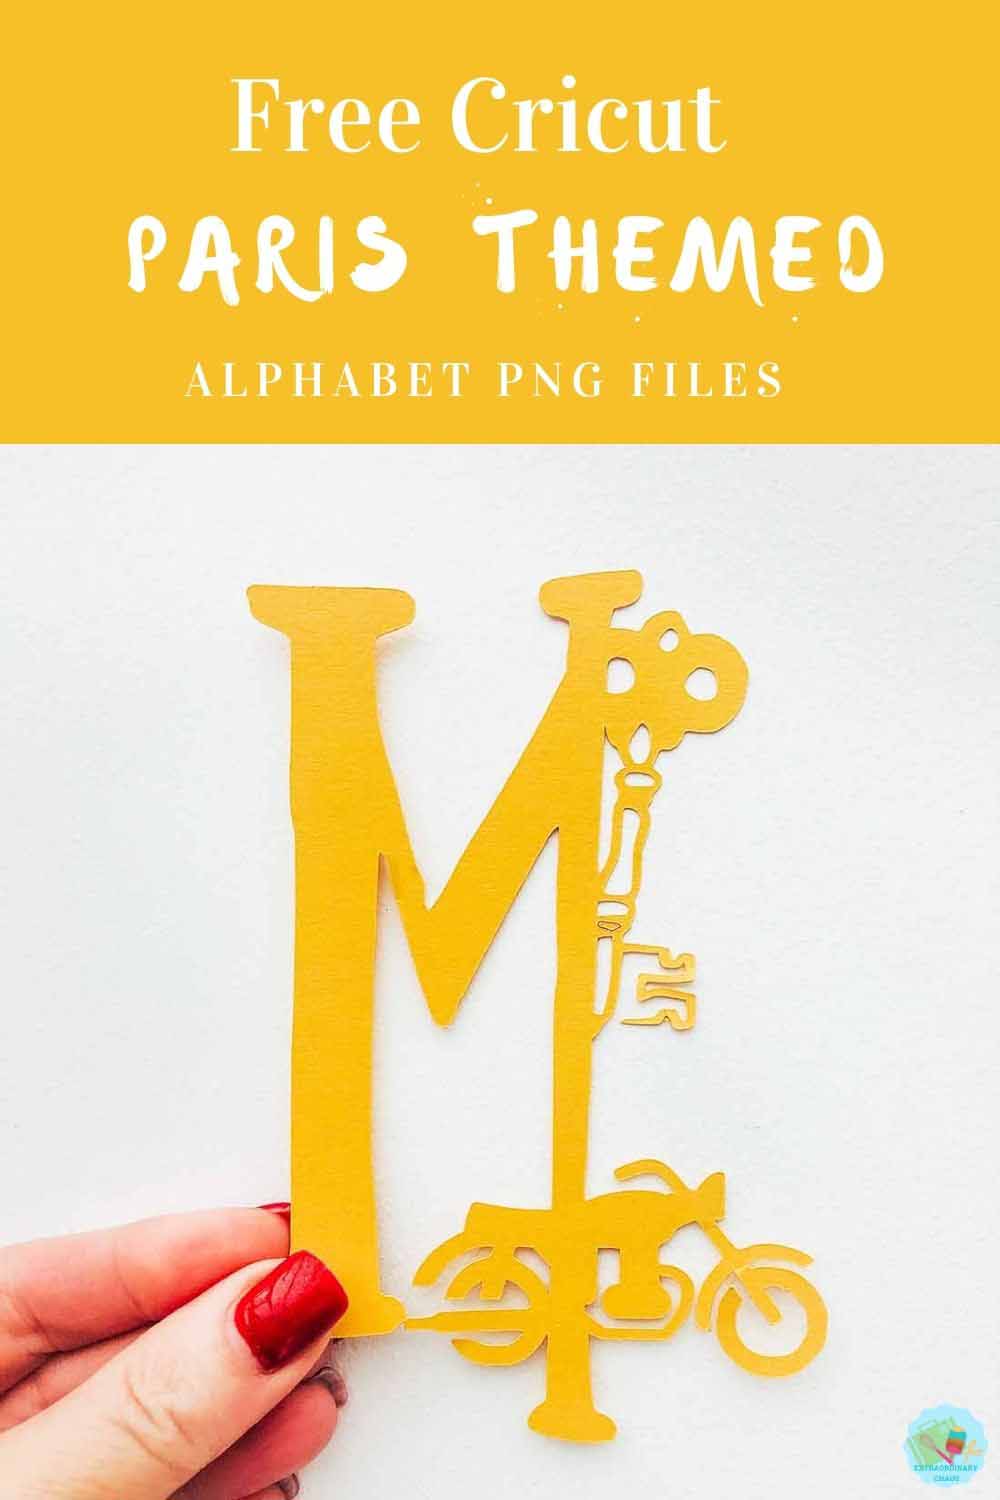 Free Cricut Paris Themed png files for Scrapbooking Layouts